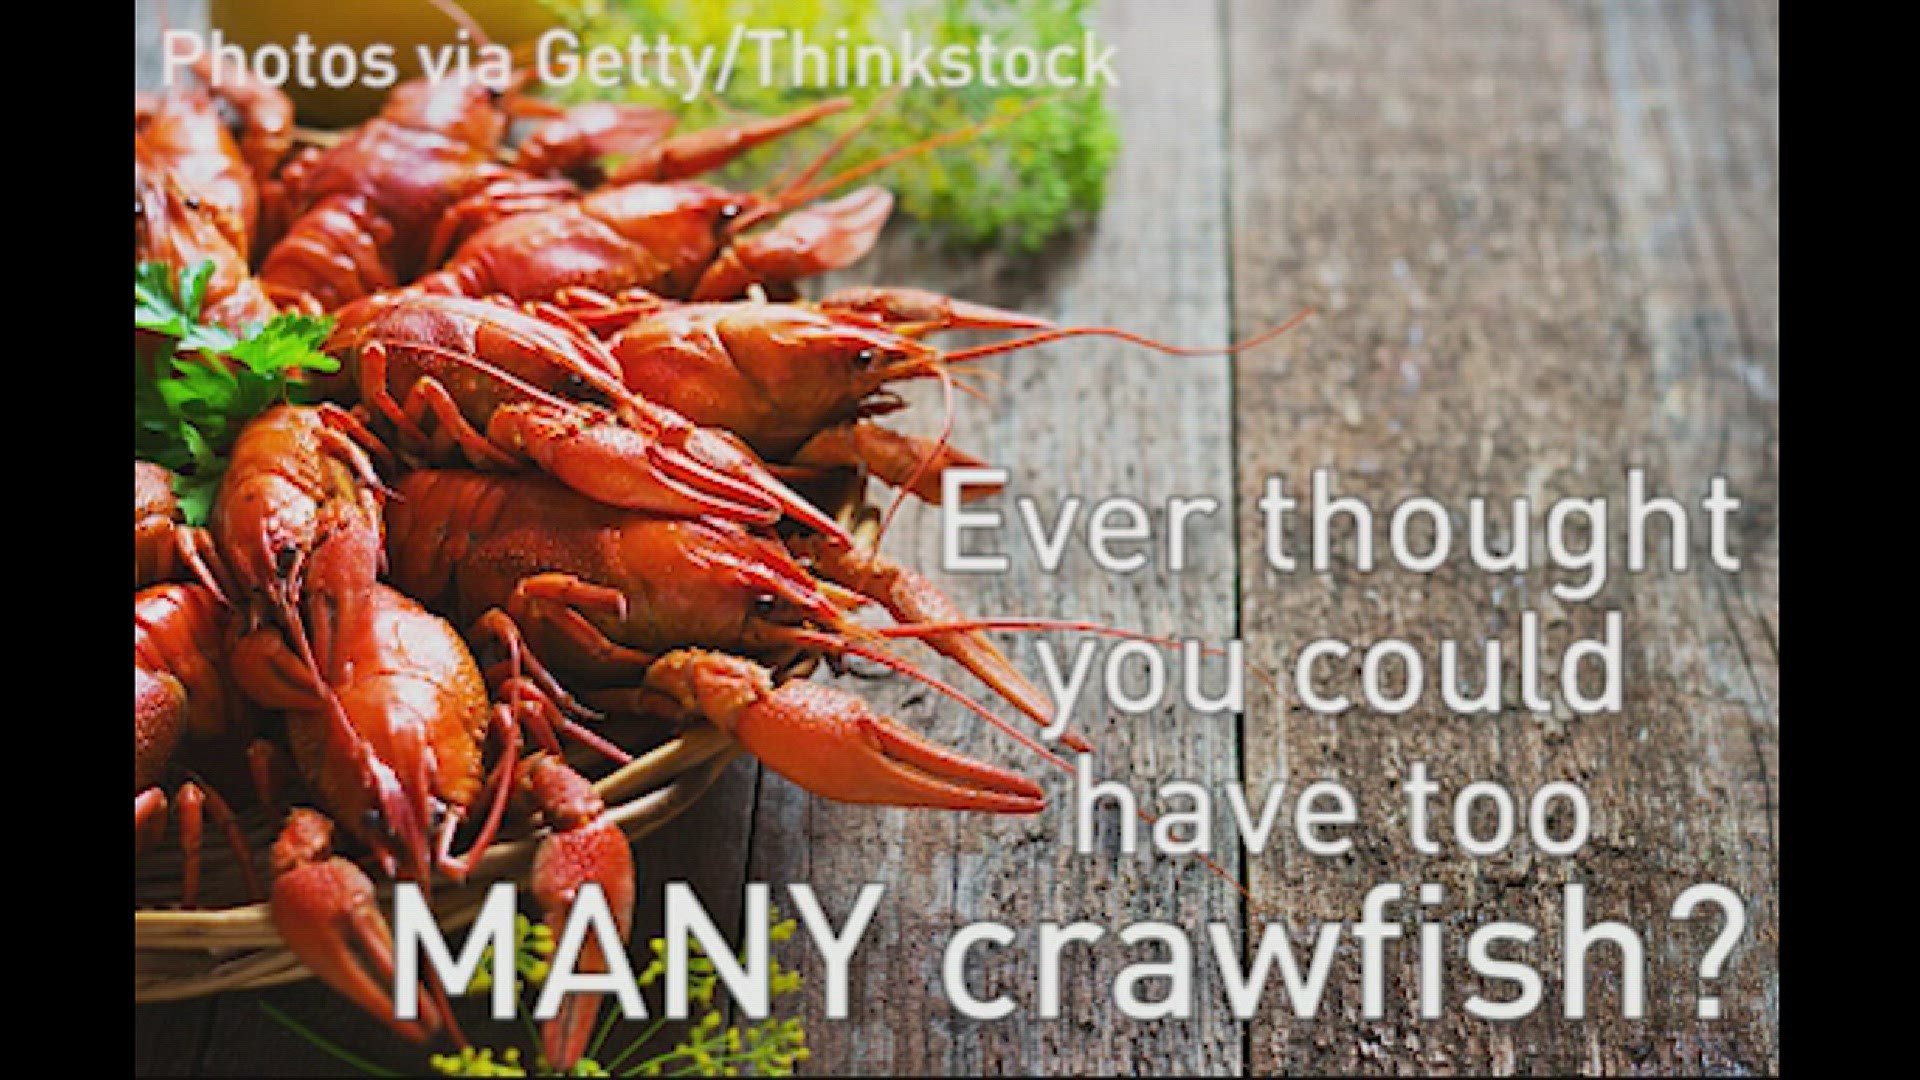 Crawfish are taking over Michigan waters, and the state can't deal.